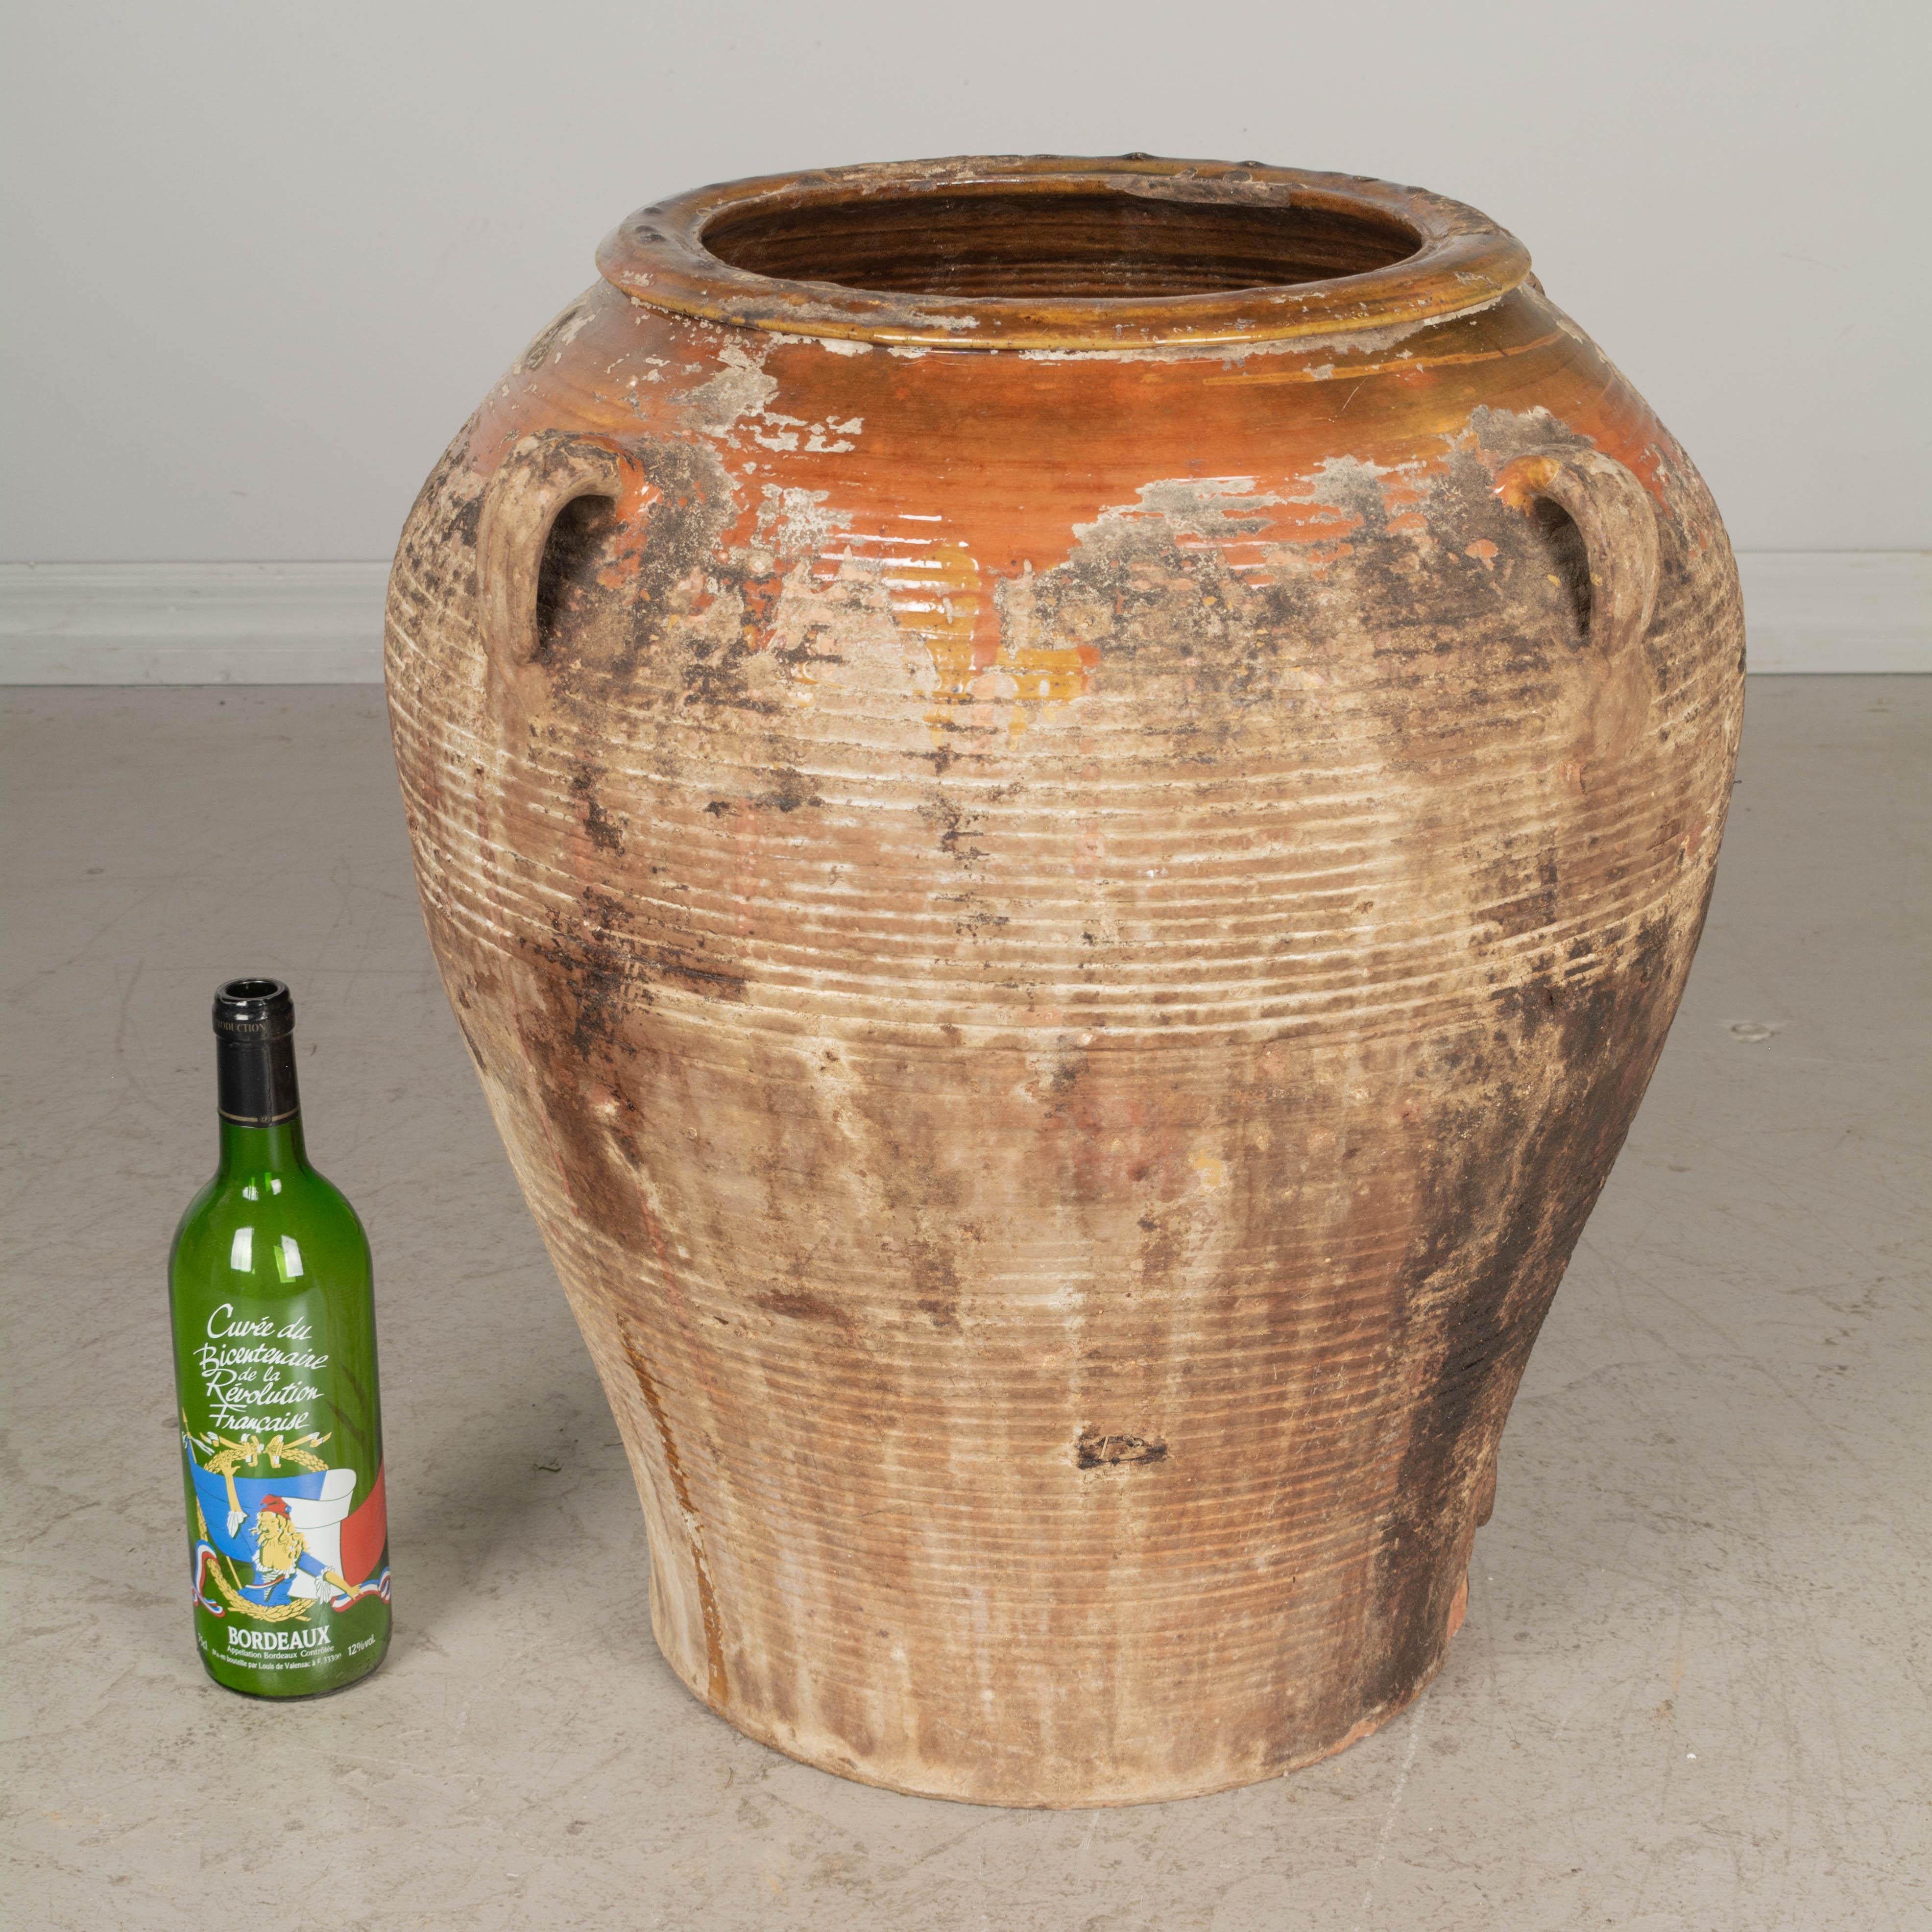 A large 19th century Spanish terracotta olive jar with orange yellow and green glaze at the rim dripping down the sides. Heavy oil residue has blackened over time creating an interesting patina. Dirt at the top has been left as is, but may be